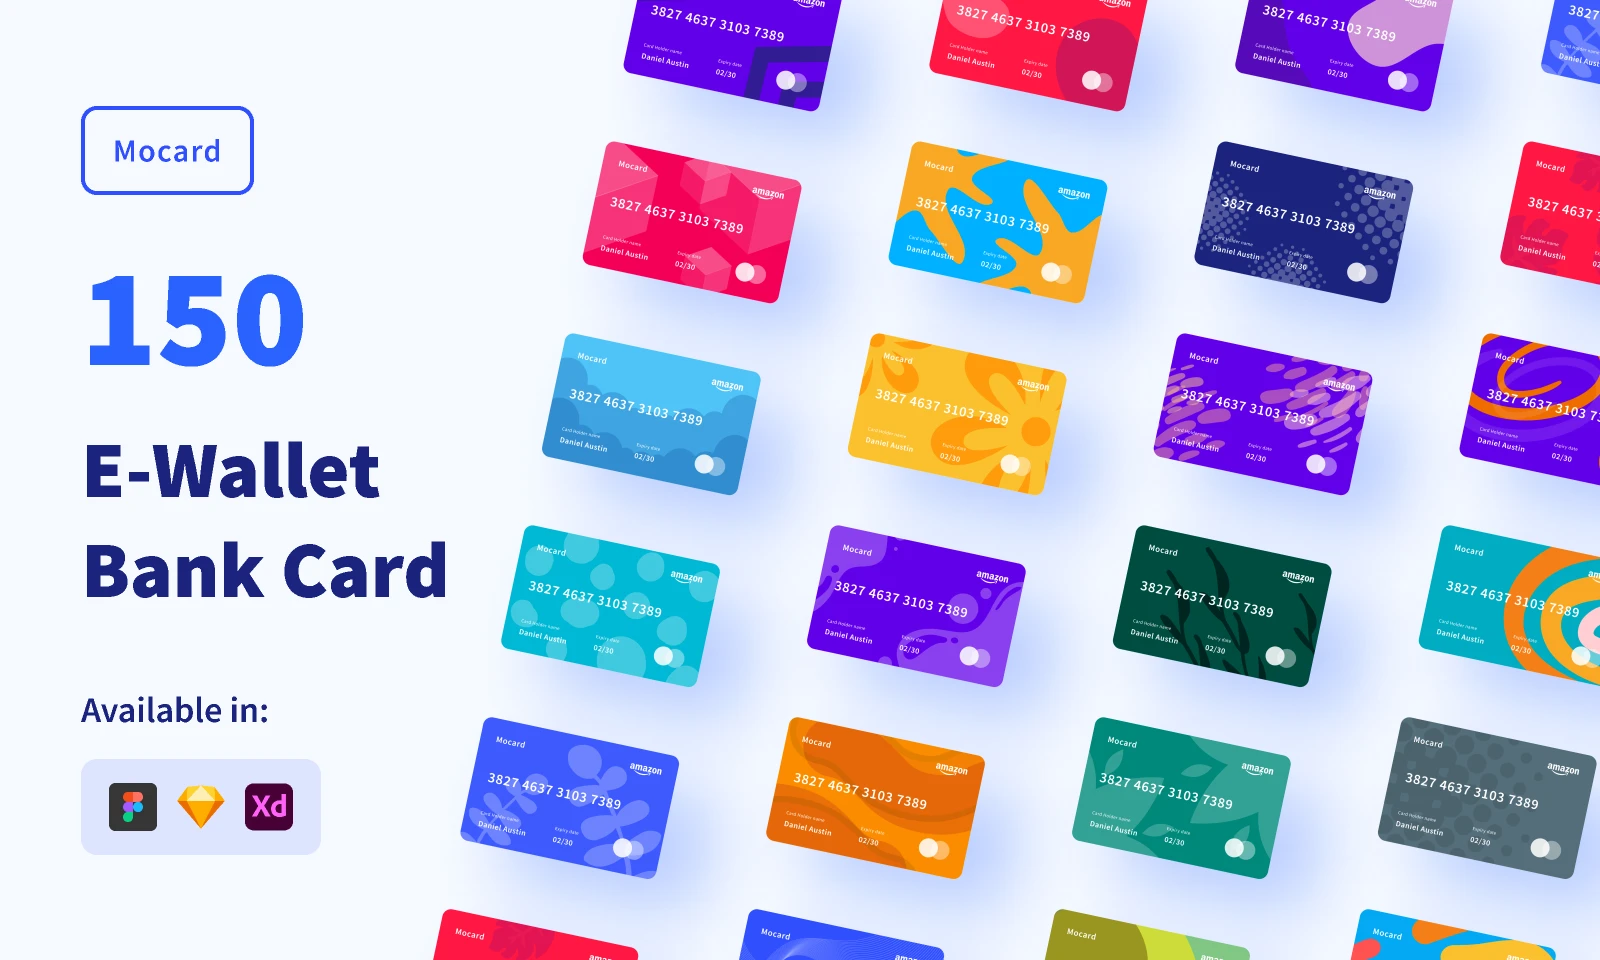 Mocard - 150 E-Wallet Bank Card for Figma and Adobe XD